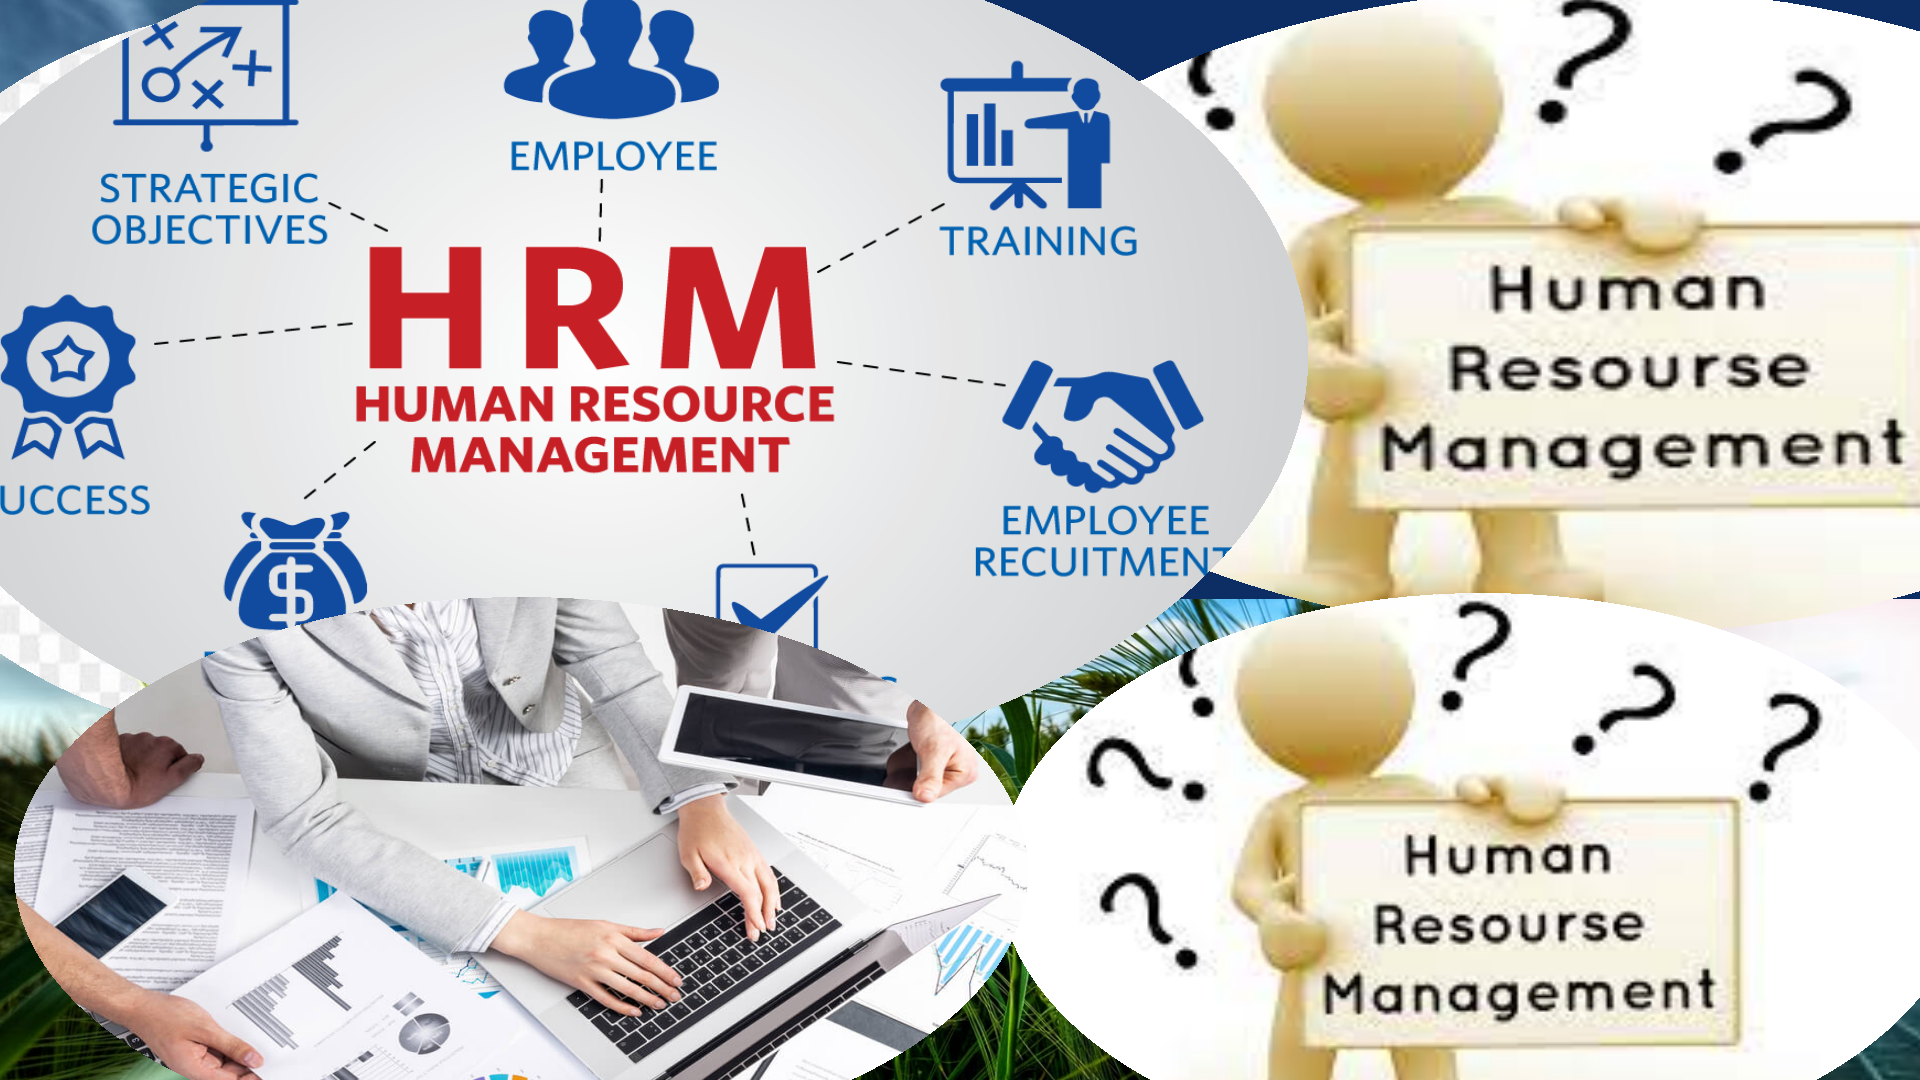 Management and Human Resources